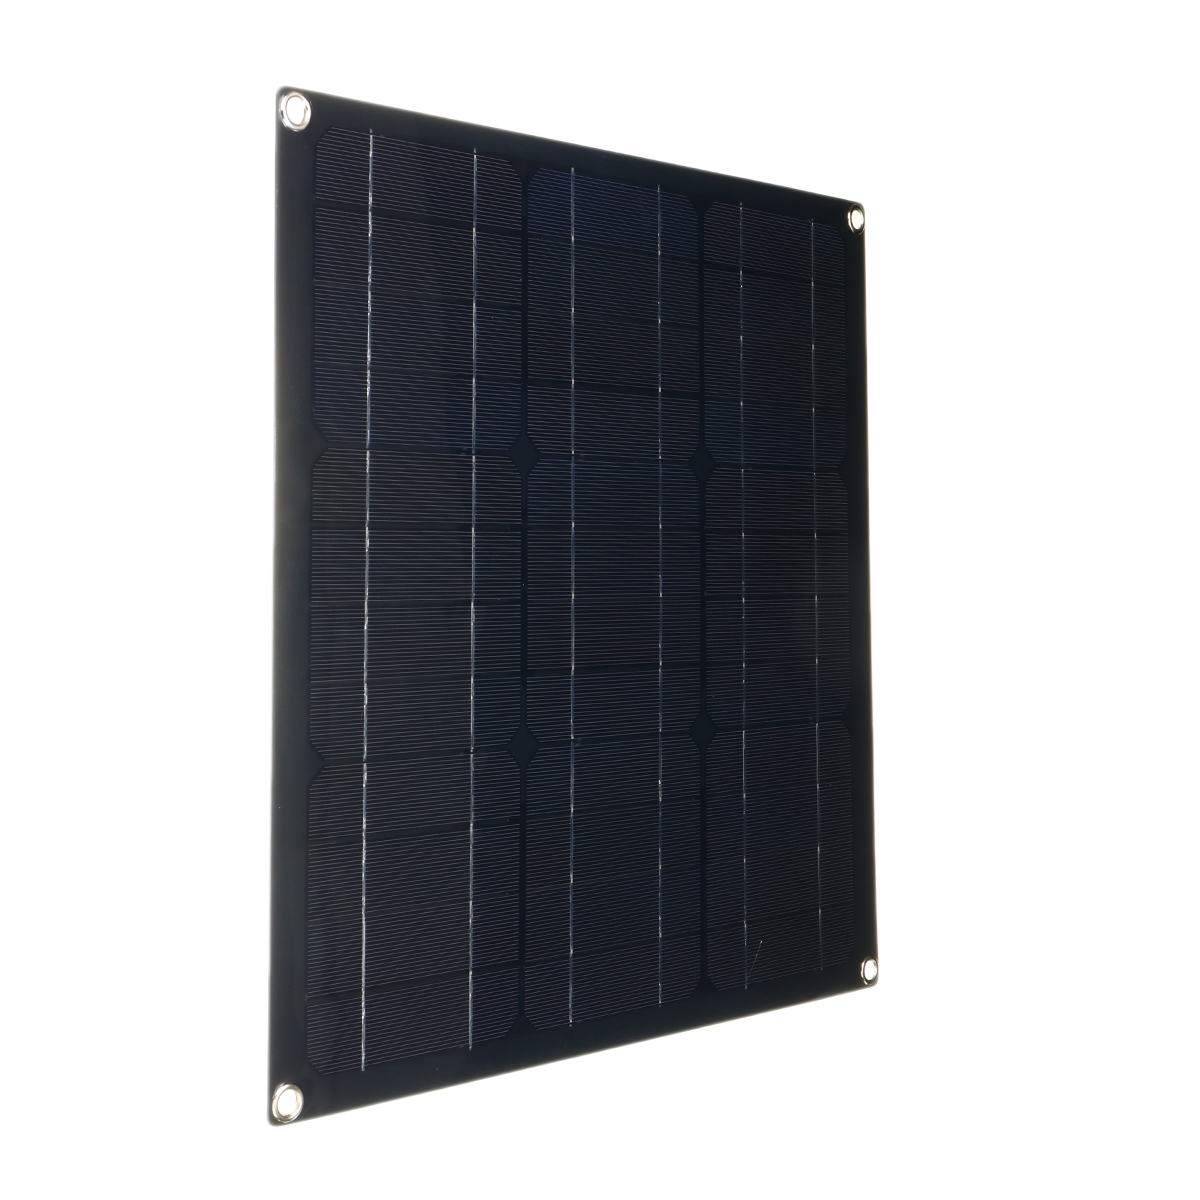 30-90A-Solar-Panel-Kit-Dual-USB-Port-Battery-Charger-LCD-Controller-With-4Pcs-Suckers-1848021-8